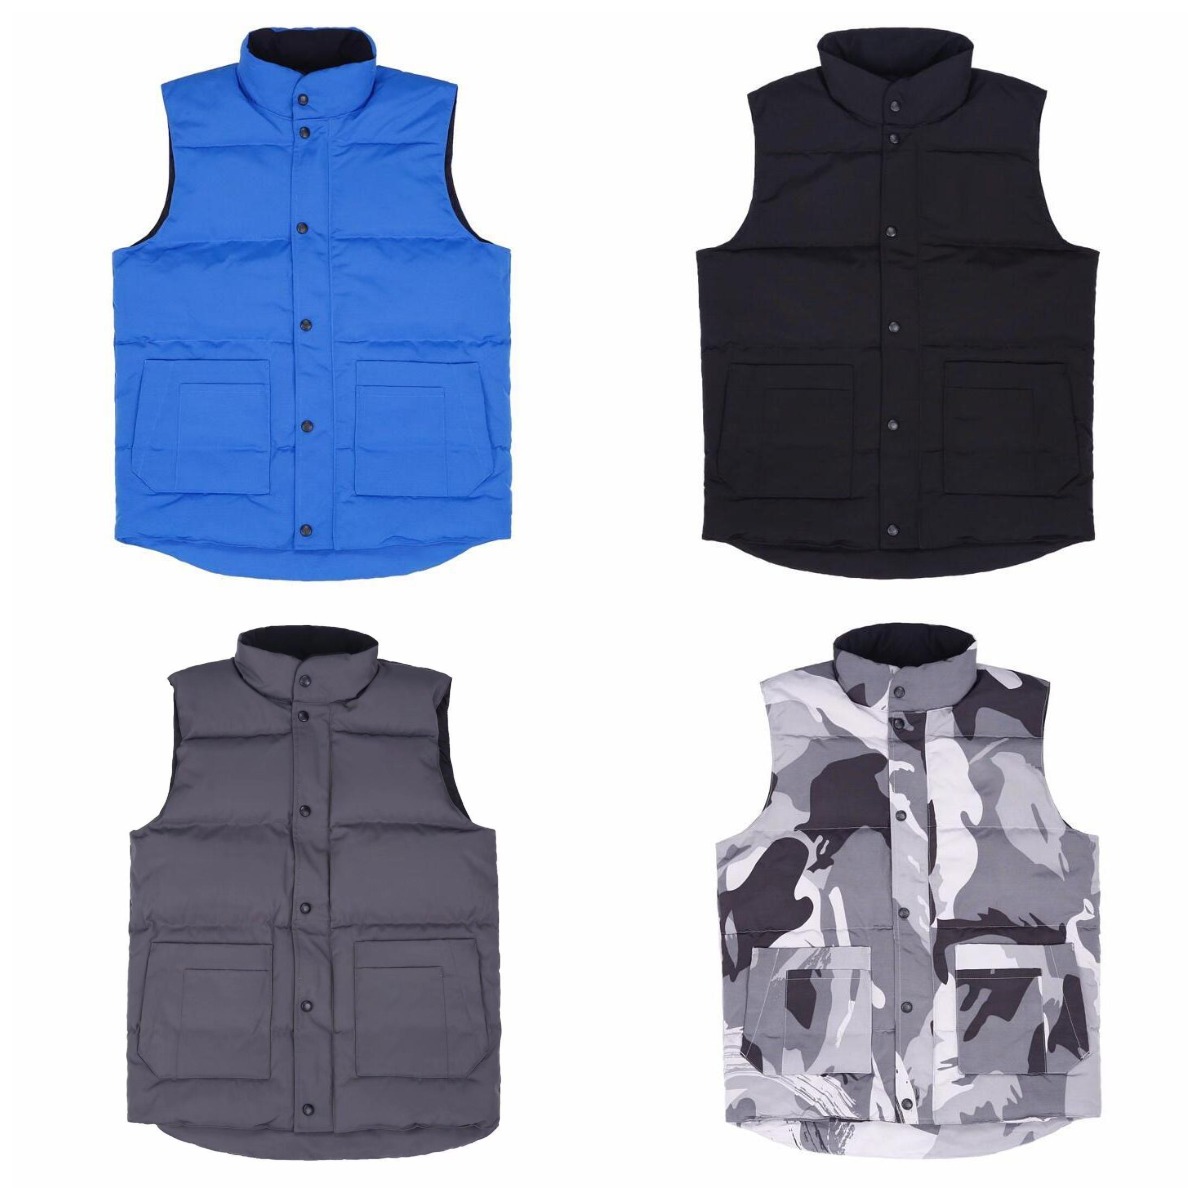 

2021 New Sweden Male Winter Puffer Sleeveless Button Thicken Vest Crew Neck Classic Fashion Men Good quality Windshield Cold Warm Down Gilets 11 Colors EU Size S, Dustbag